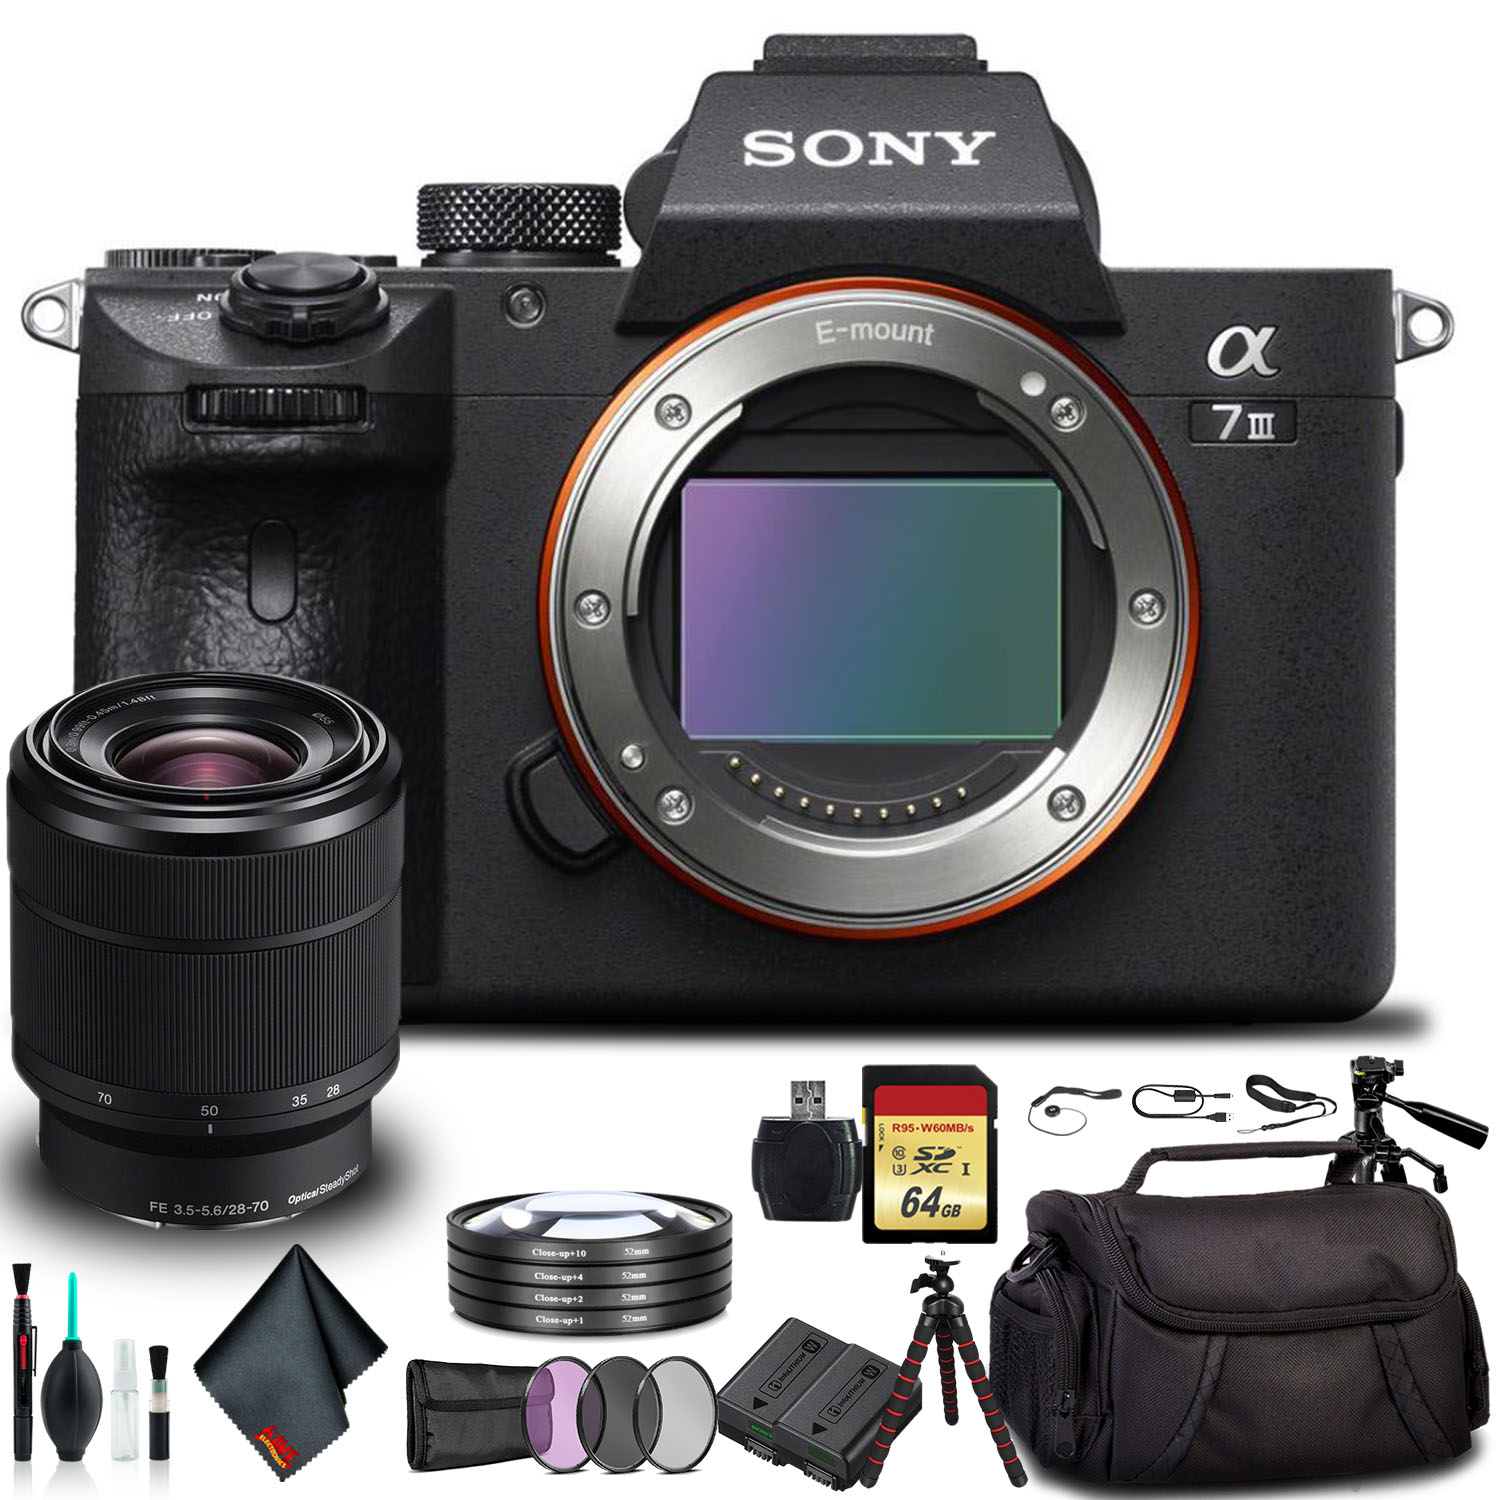 Sony Alpha a7 III Mirrorless Camera with 28-70mm Lens ILCE7M3K/B With Soft Bag, Tripod, Additional Battery, 64GB Memory Card, Card Reader , Plus Essential Accessories - image 1 of 6